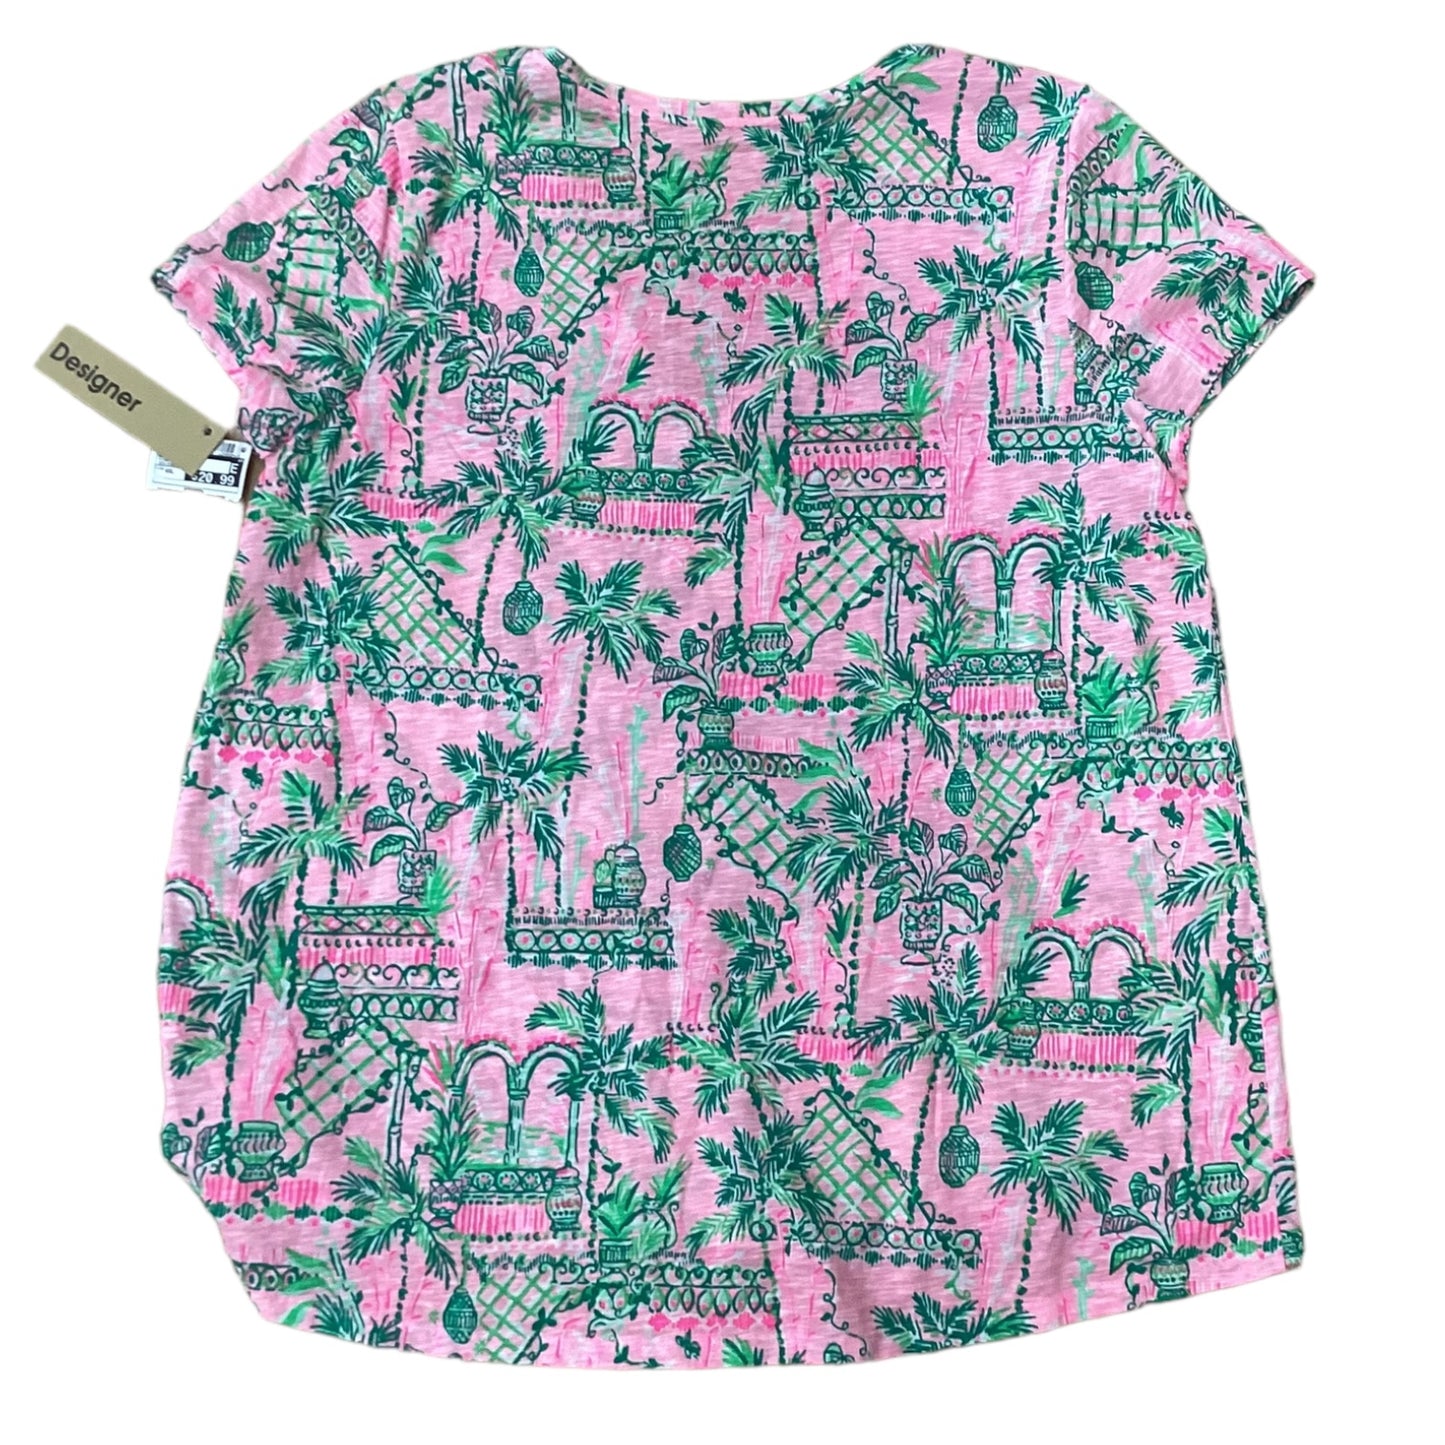 Blouse Short Sleeve By Lilly Pulitzer  Size: Xxl